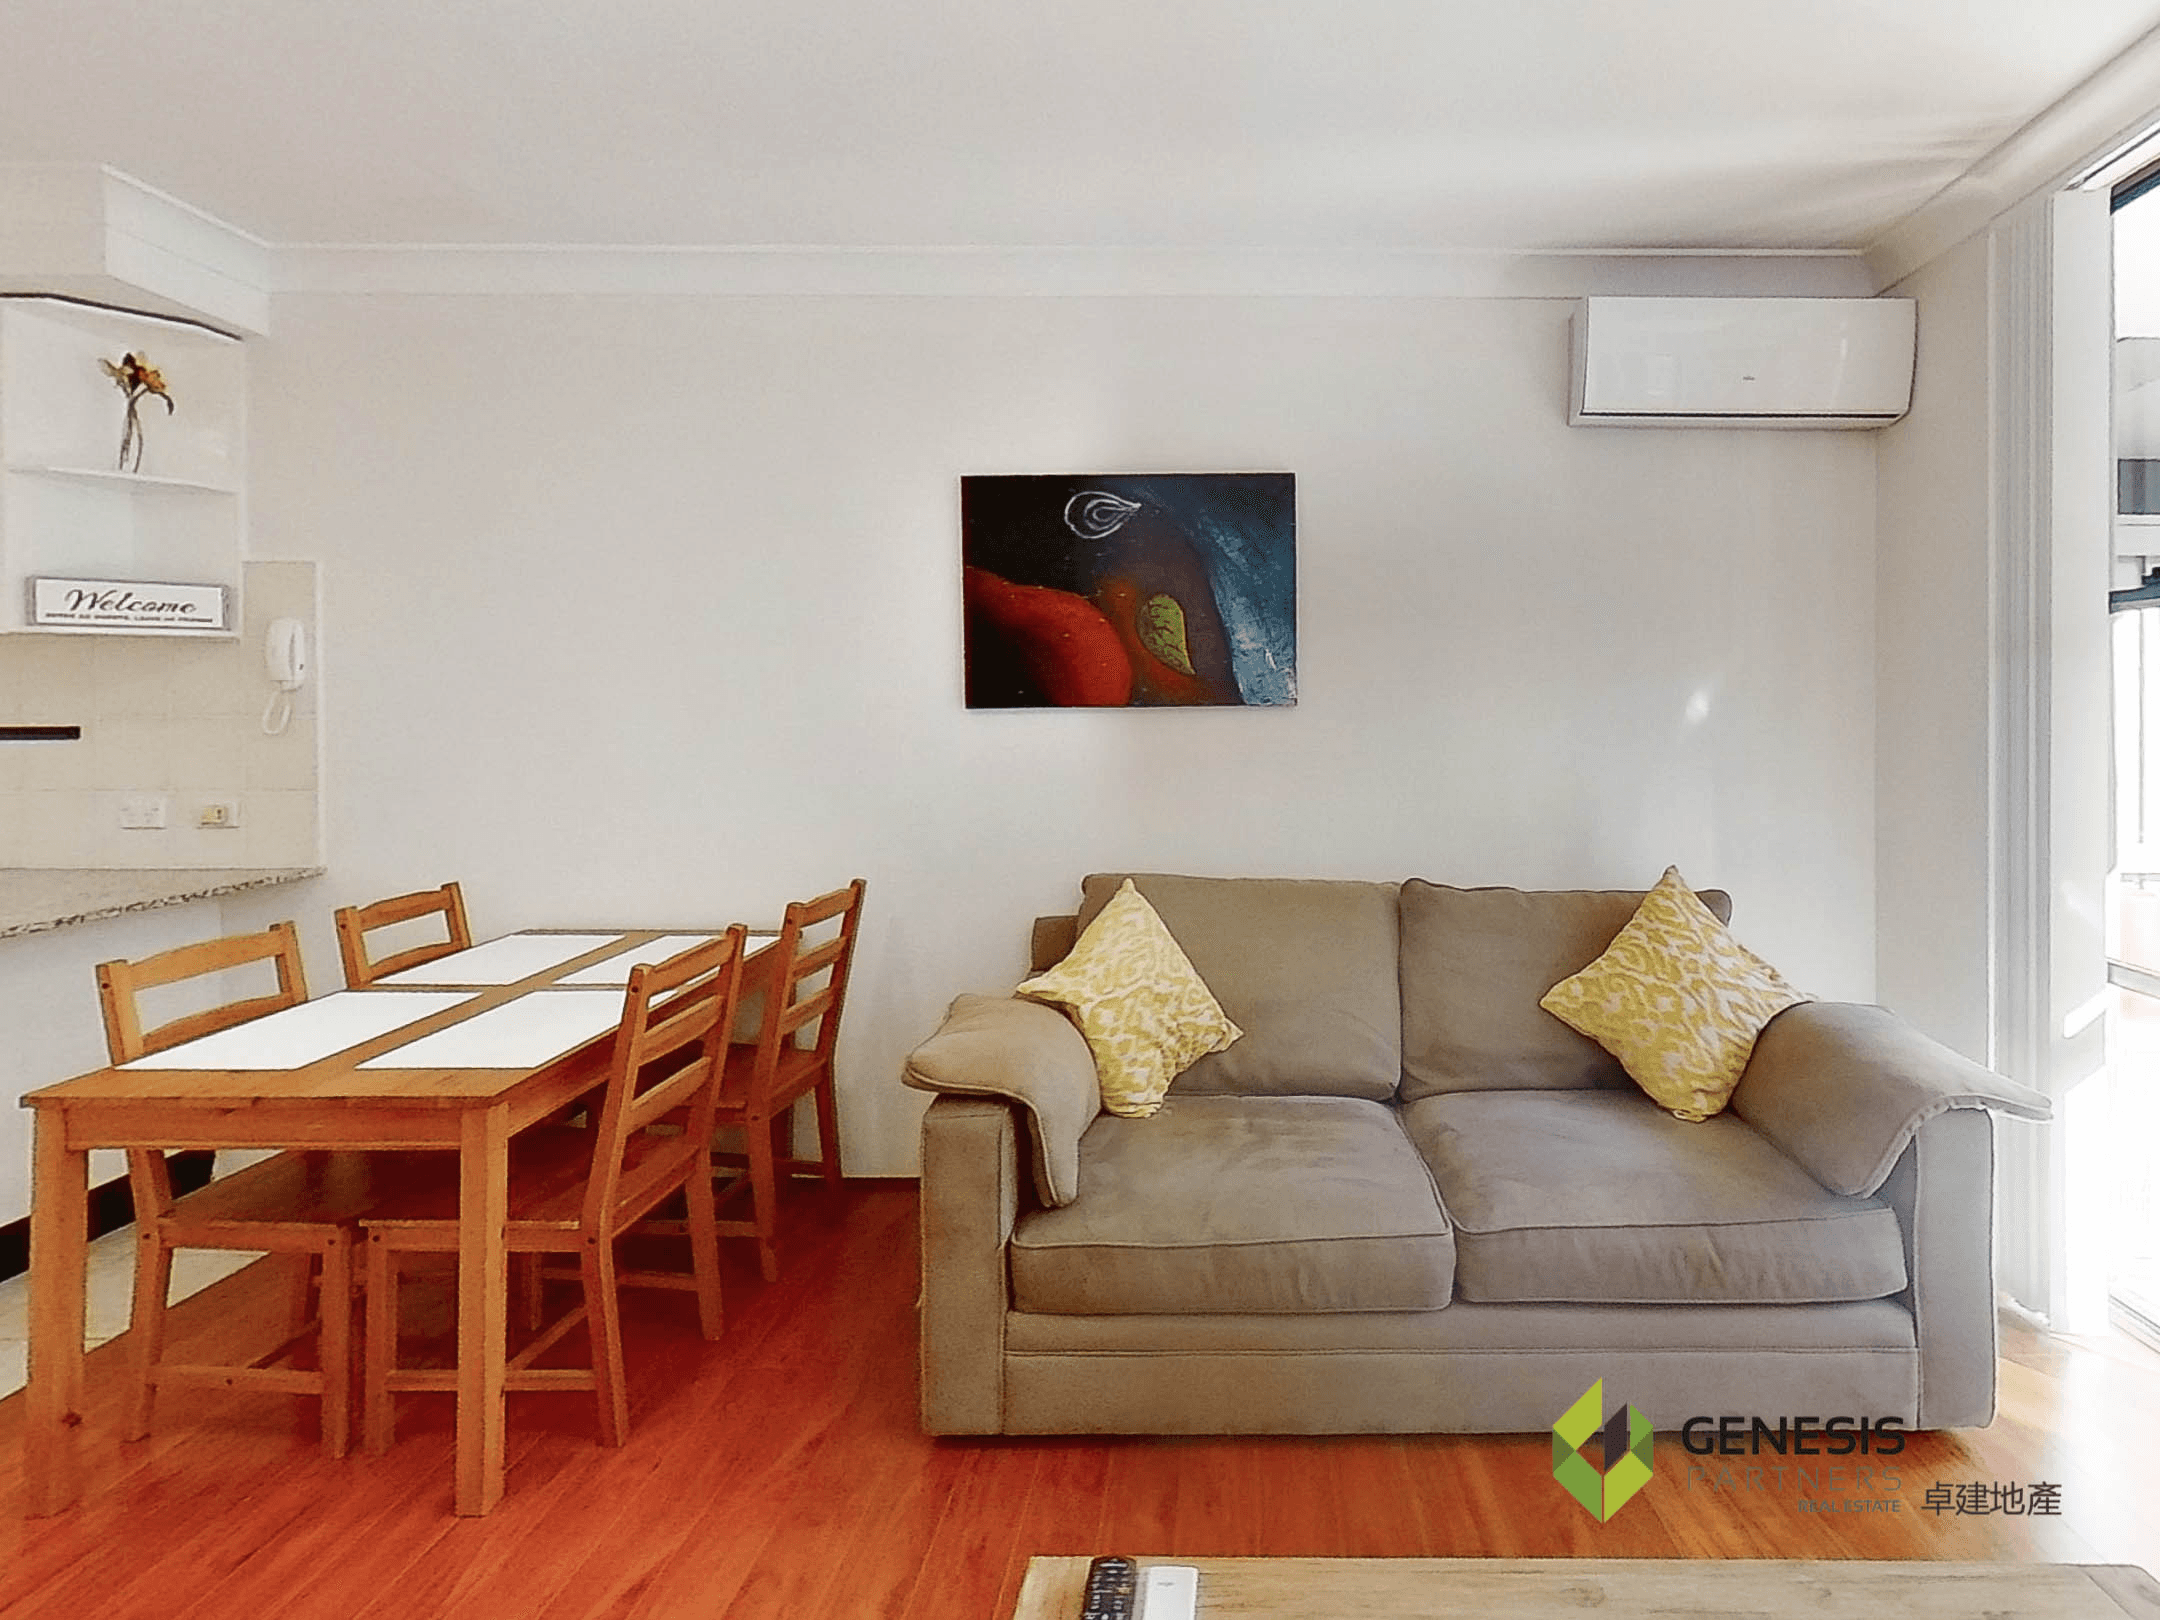 13/5-17 Pacific Highway, ROSEVILLE, NSW 2069